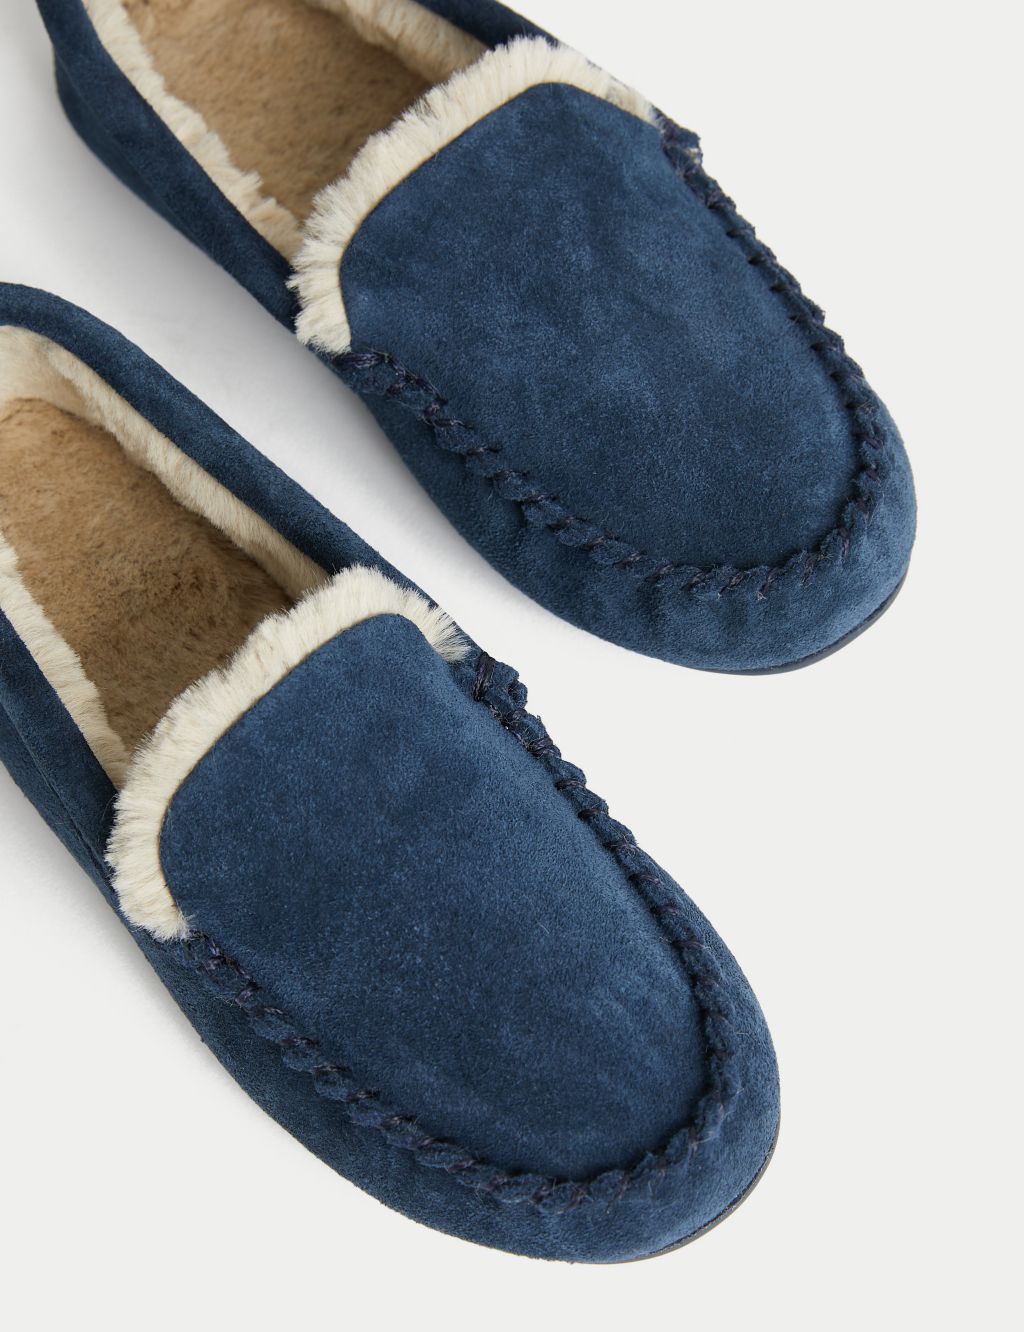 Kids' Suede Freshfeet™ Slippers (4 Small - 7 Large) image 3